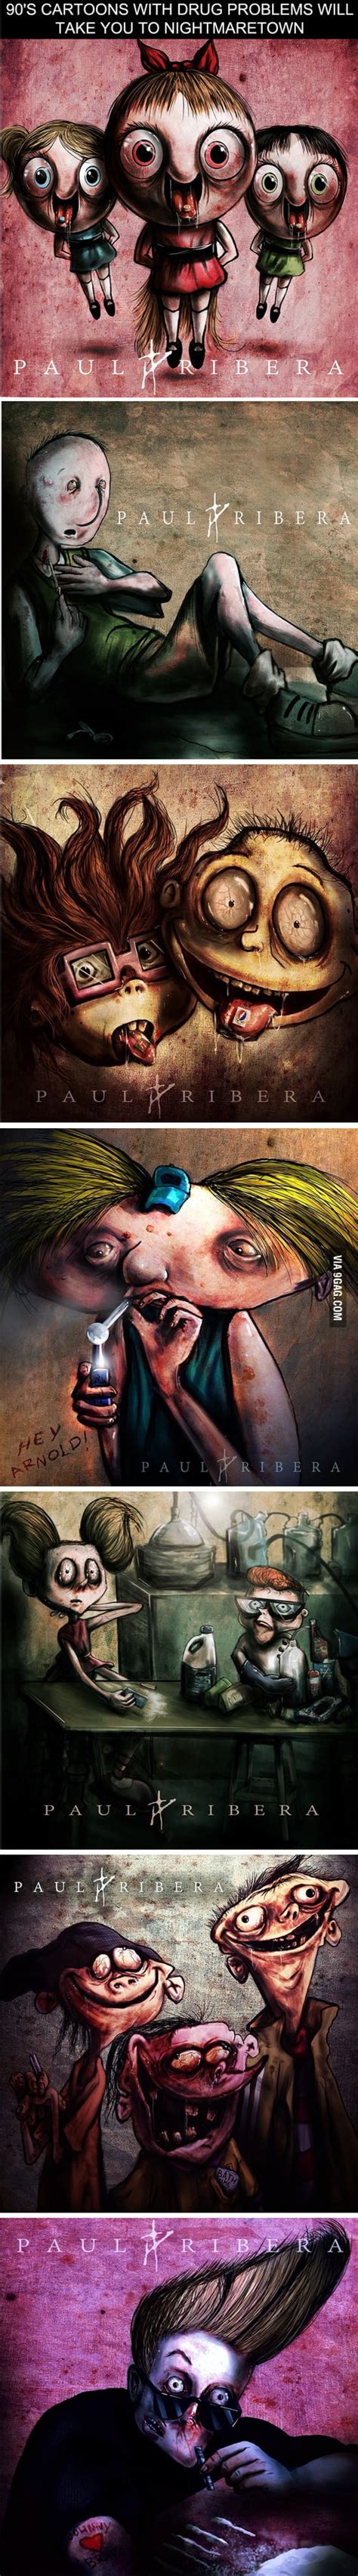 90s Cartoons With Drug Problems Will Take You To Nightmaretown 9gag